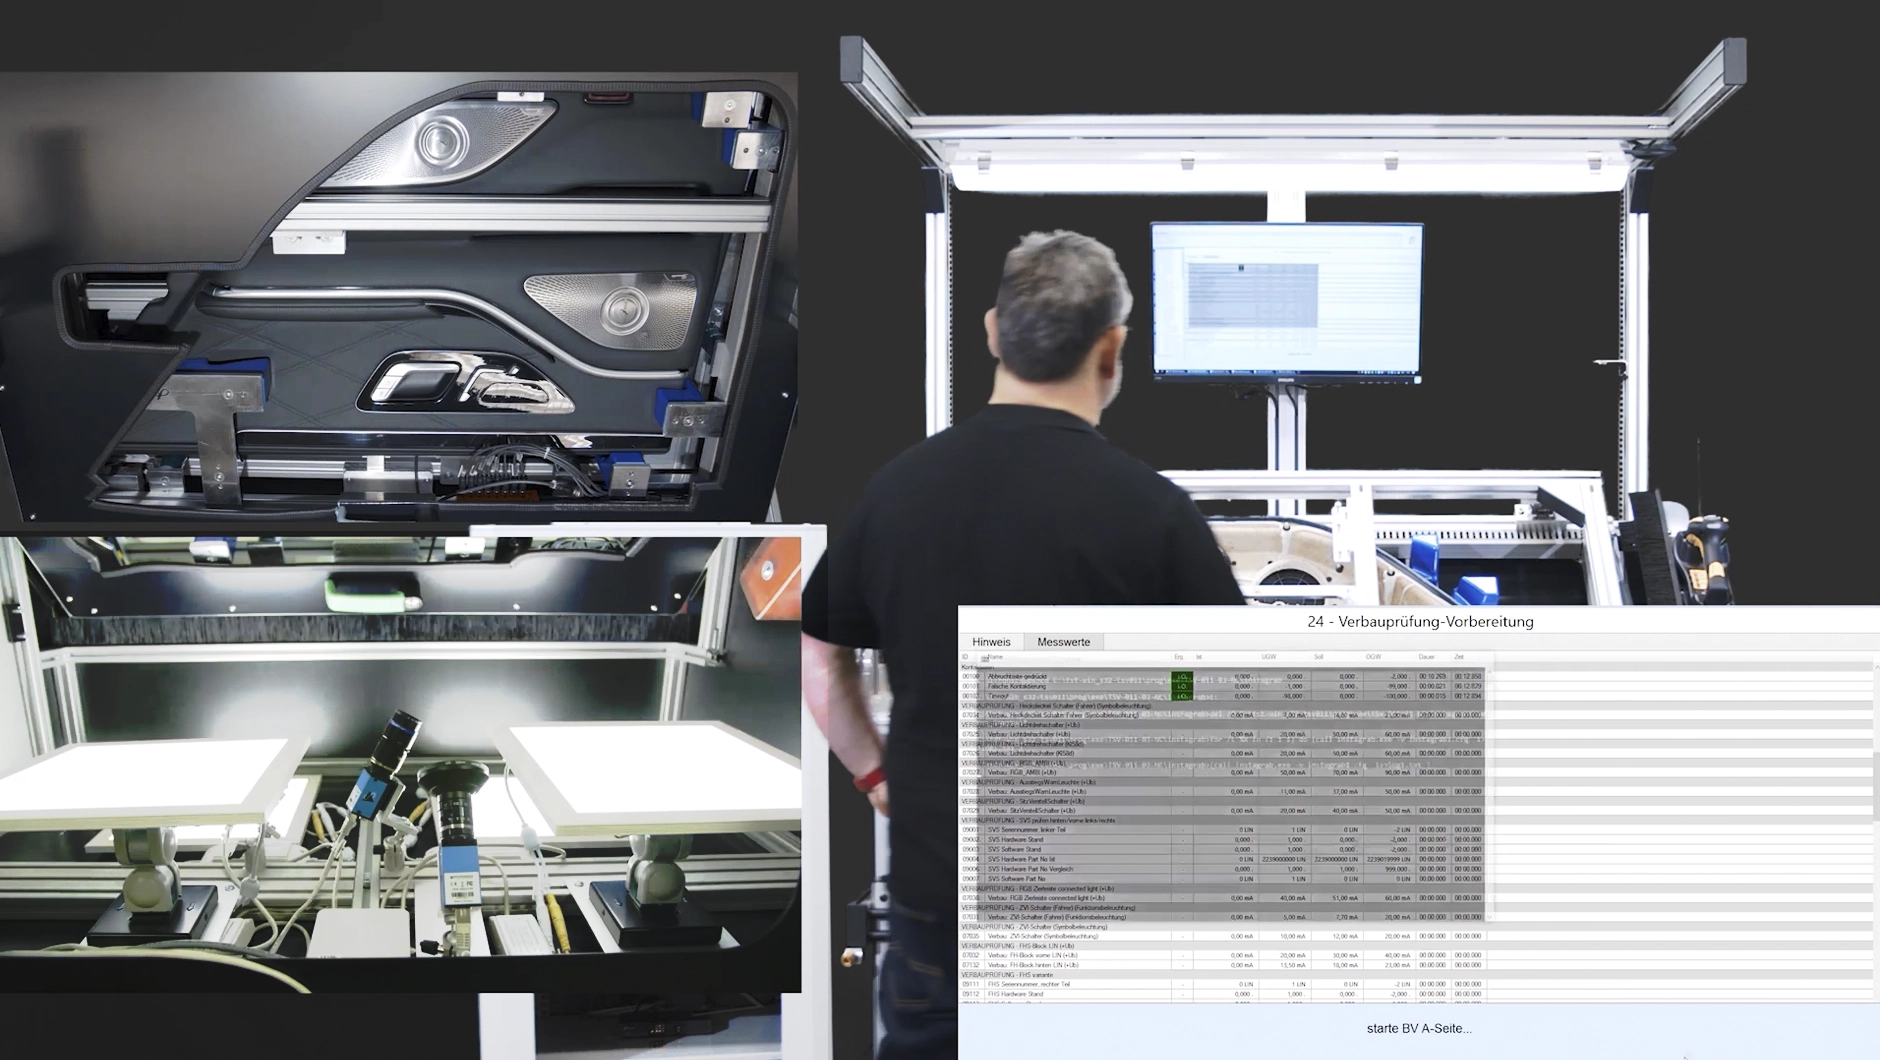 Zero-defects manufacturing: Composite image showing a door panel inspection test bench. GigE industrial cameras (seen here in bottom left of image) deliver numerous images that are processed within a half second to determine product conformity. (Image courtesy of ITgroup.)